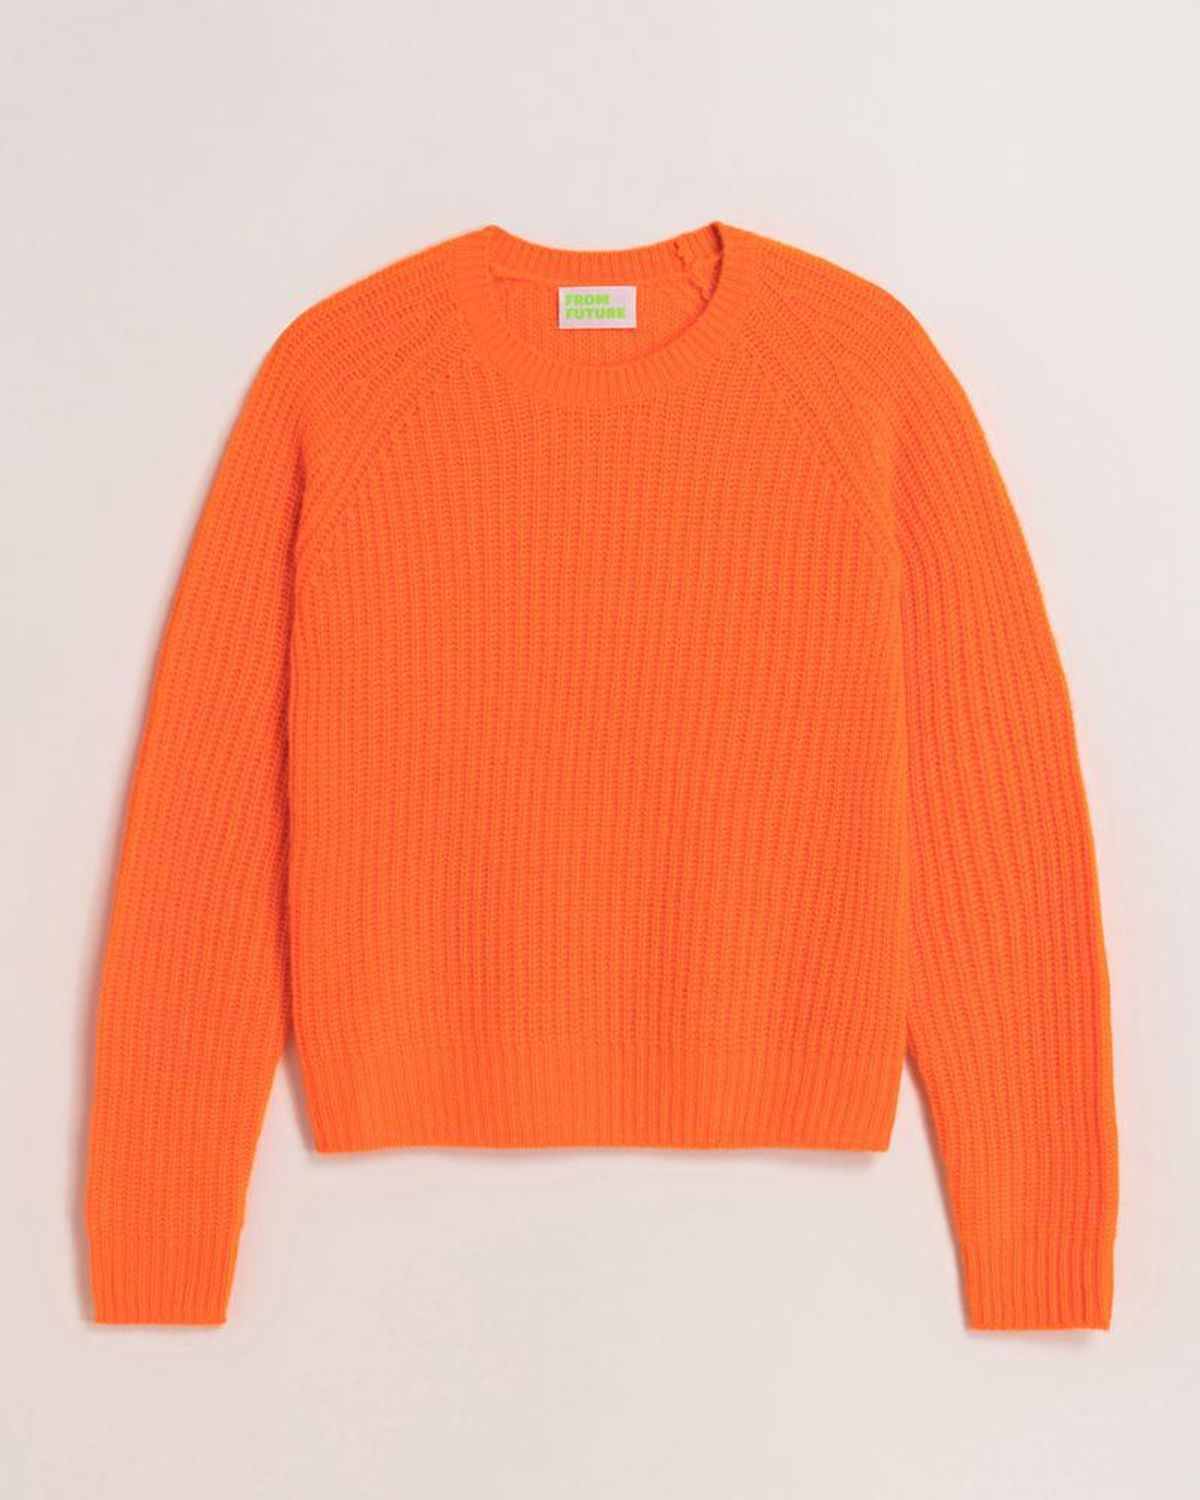 from future pearl knit crew neck